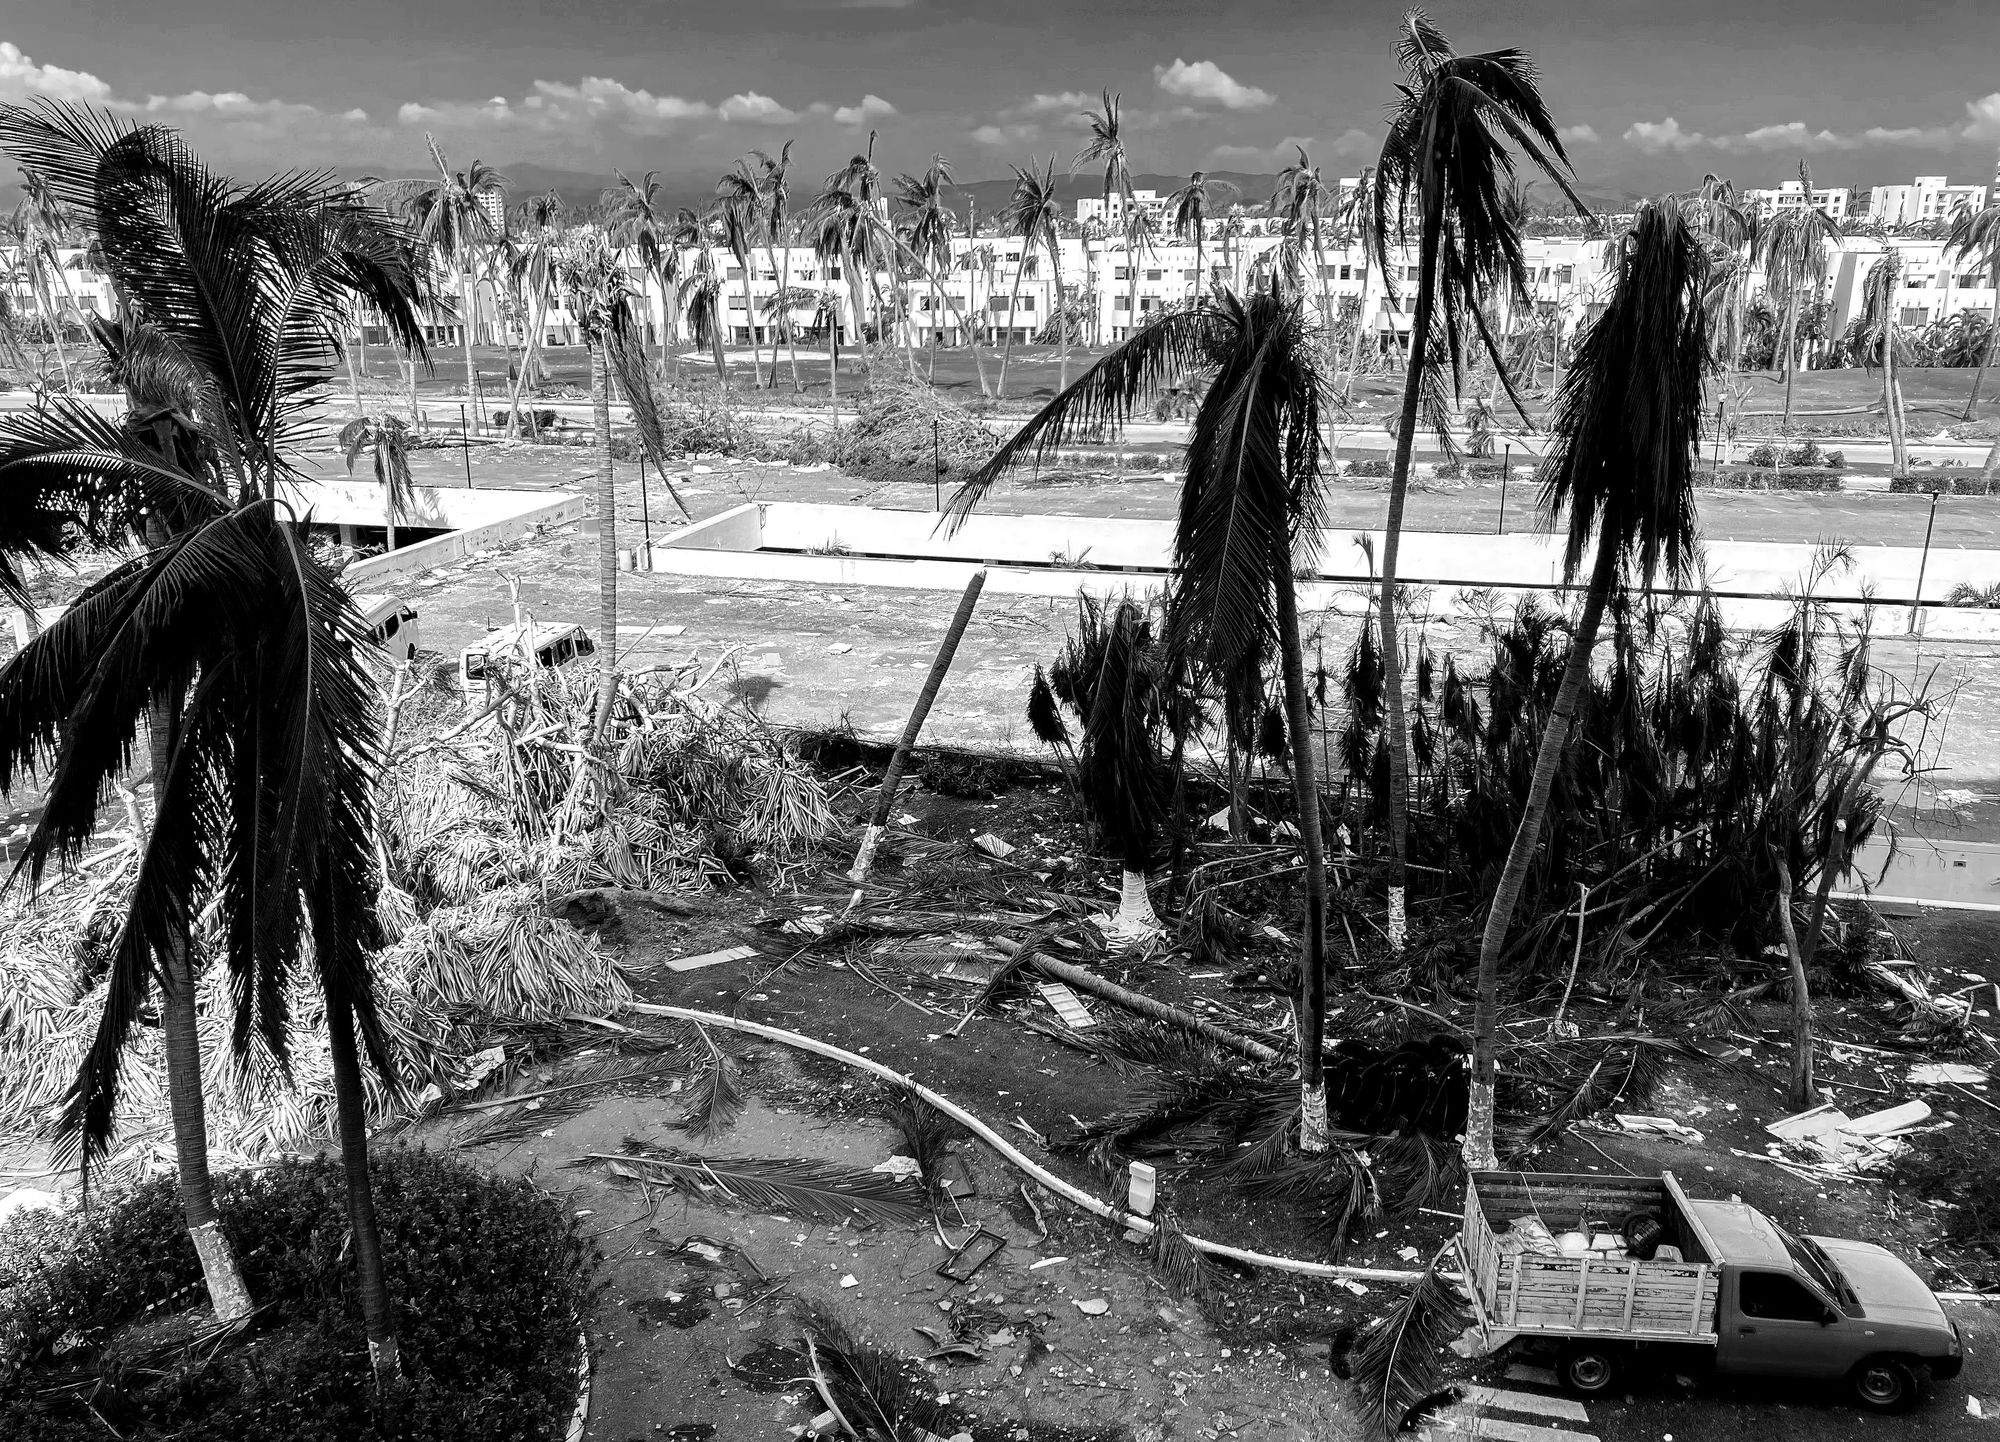 PHOTO: Acapulco is falling apart after it got smashed by the hurricane. Who is gonna help the people?